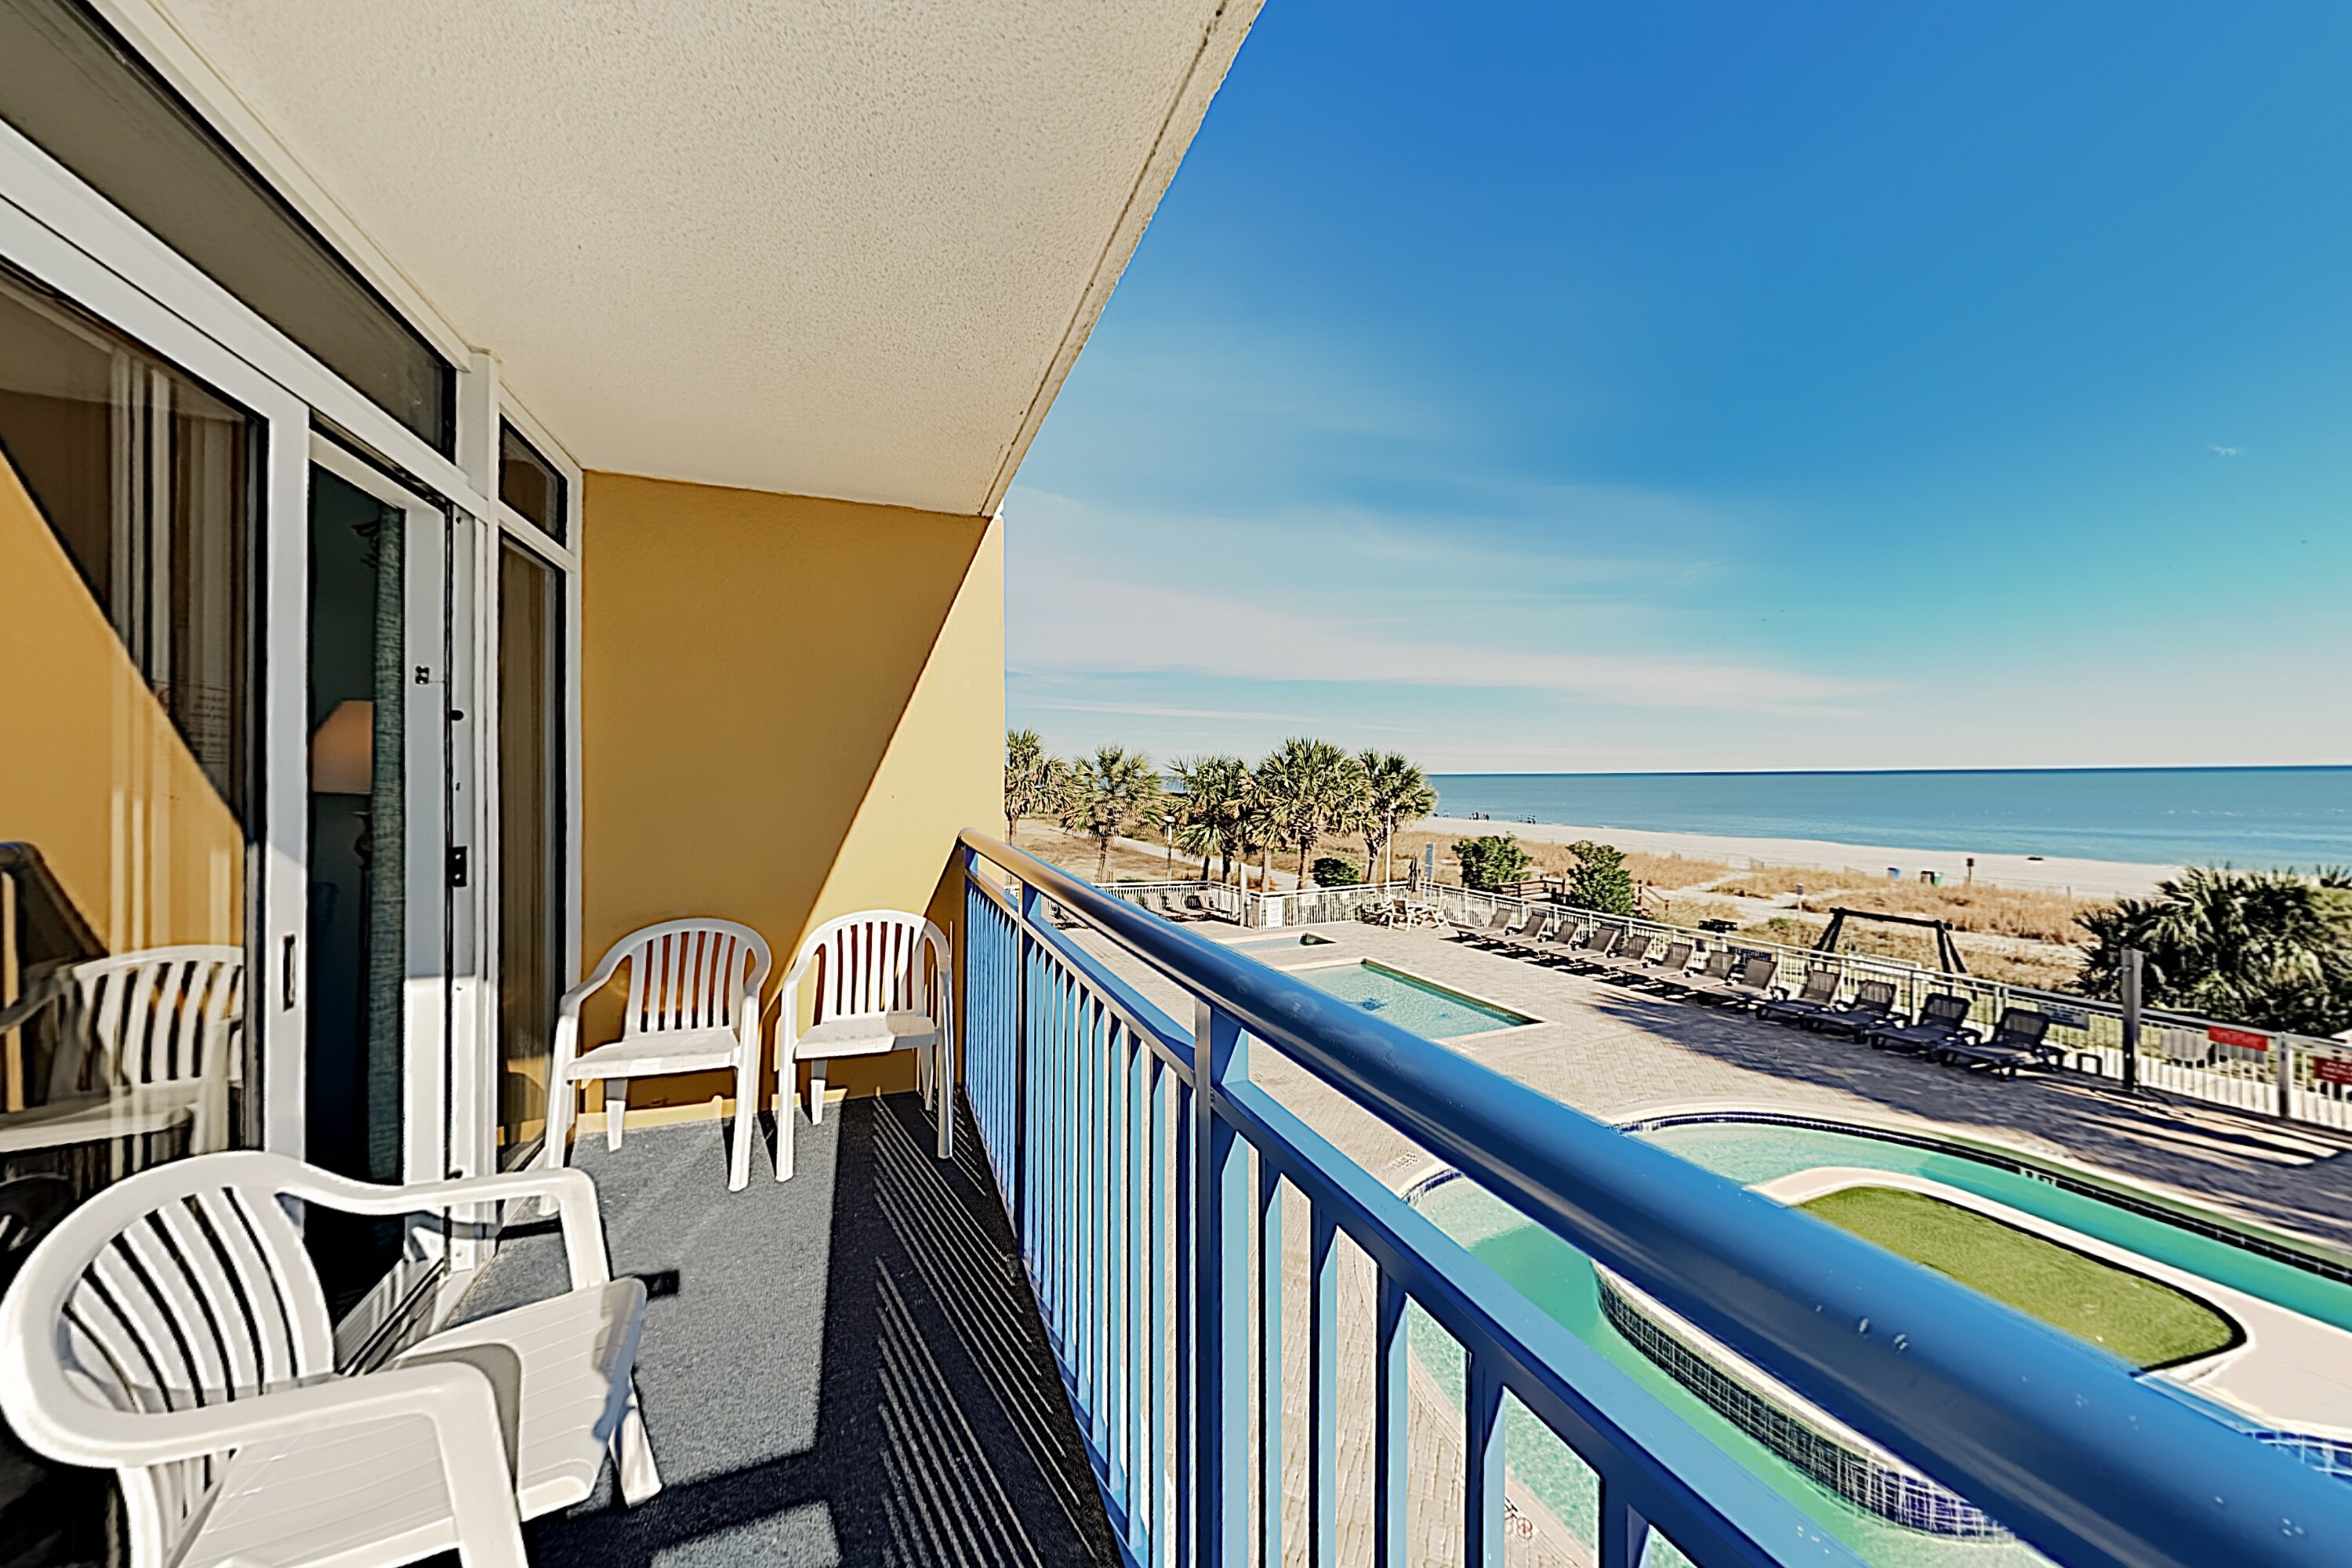 Sip morning coffee on the beachfront balcony, outfitted with seating for 4.